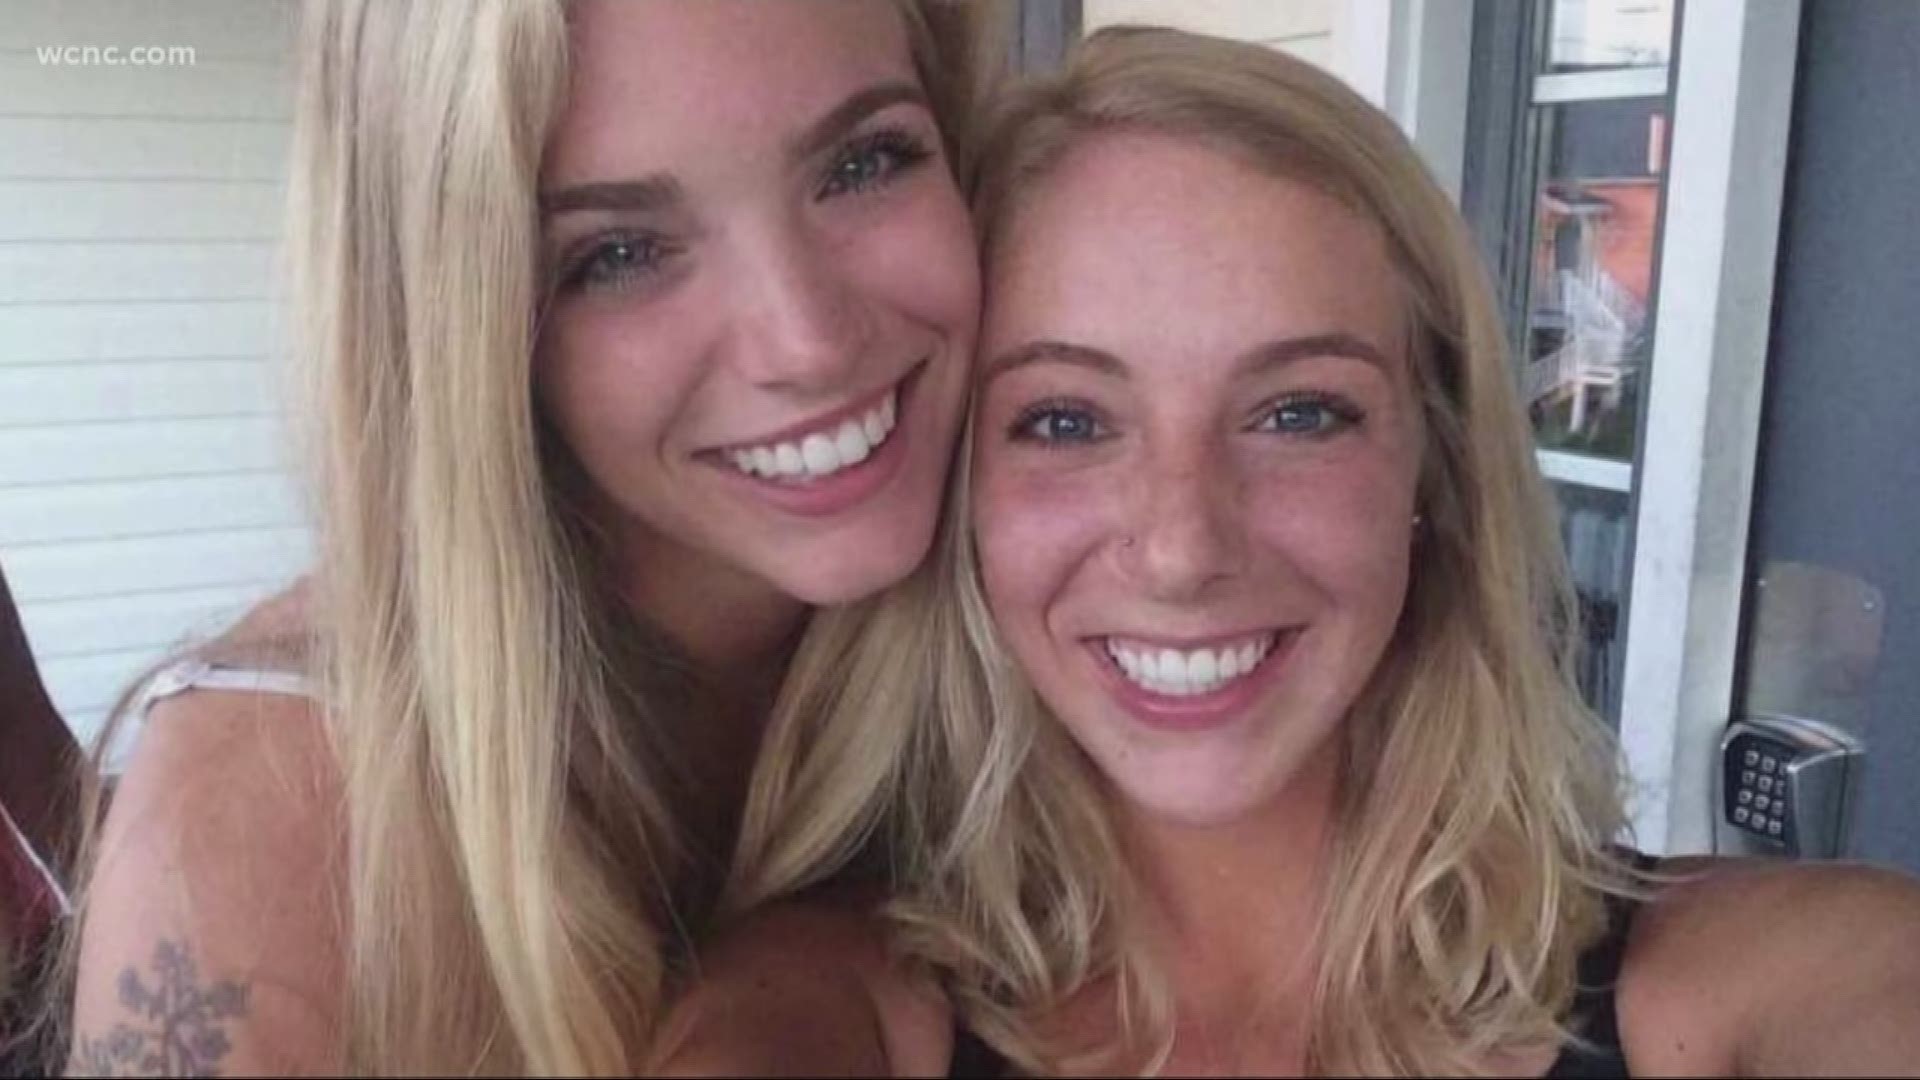 Two young women, Mooresville sisters, were killed by a drunk driver who was three times over the legal blood-alcohol limit.